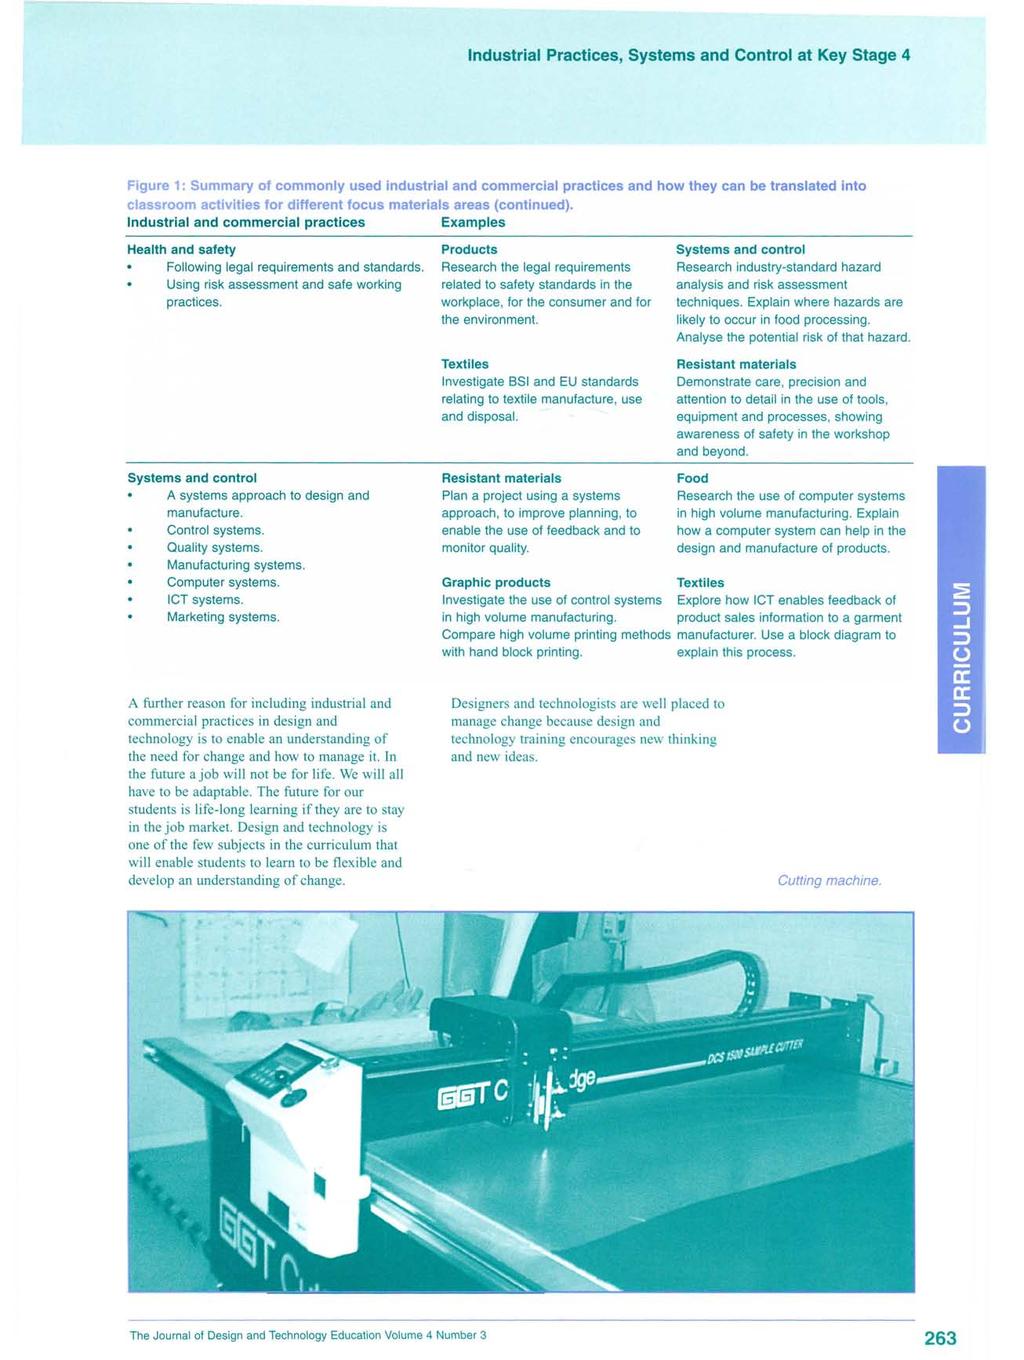 Figure 1: Summary of commonly used industrial and commercial practices and how they can be translated into classroom activities for different focus materials areas (continued).